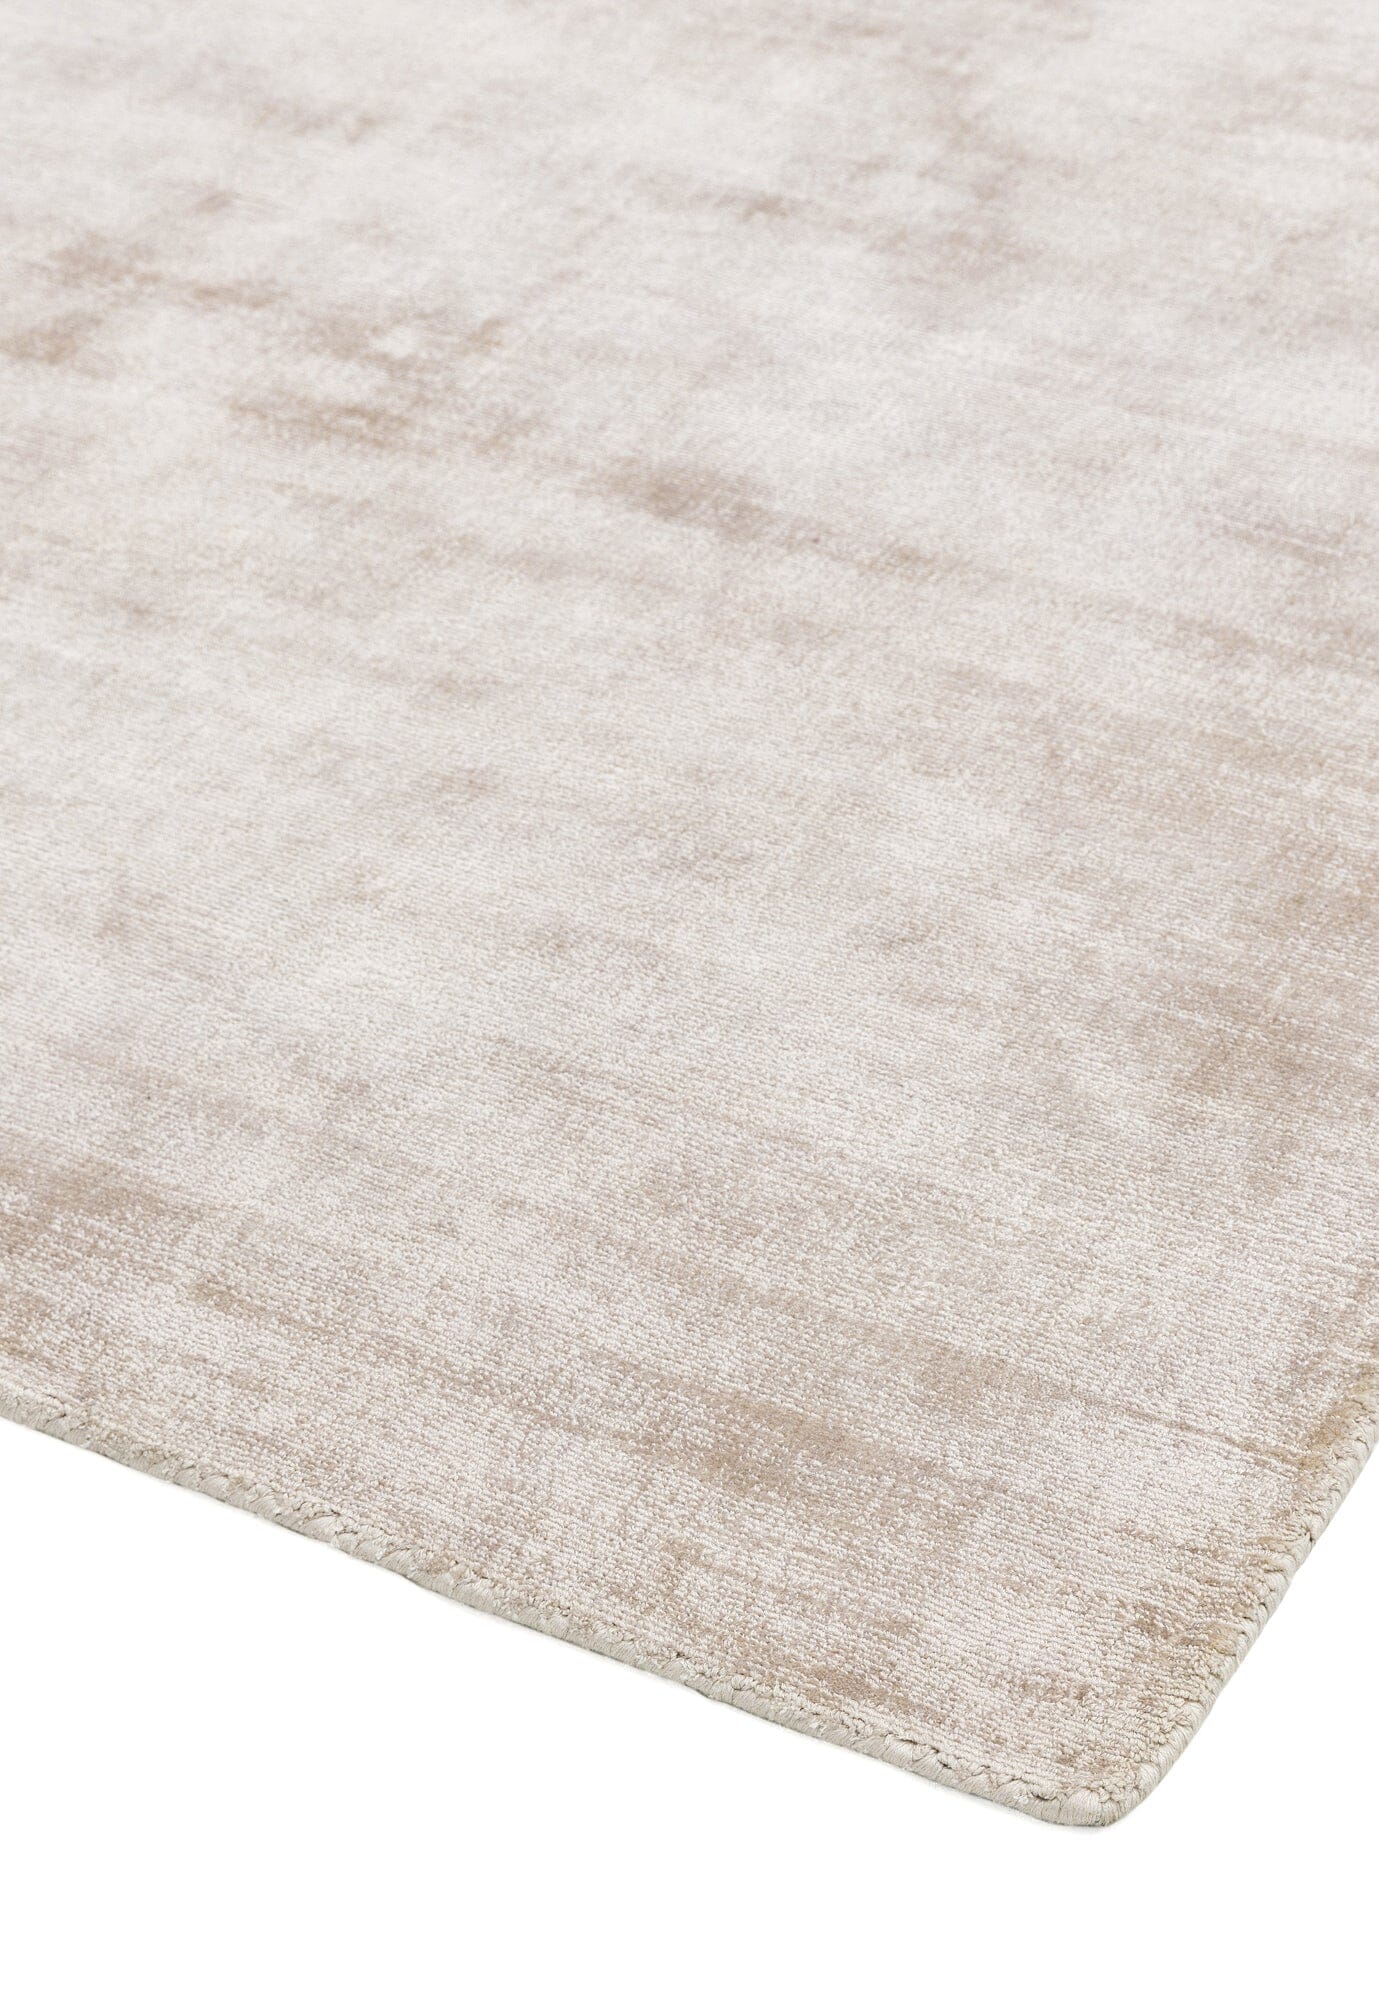  Asiatic Carpets-Asiatic Carpets Blade Hand Woven Rug Putty - 120 x 170cm-Beige, Natural 829 